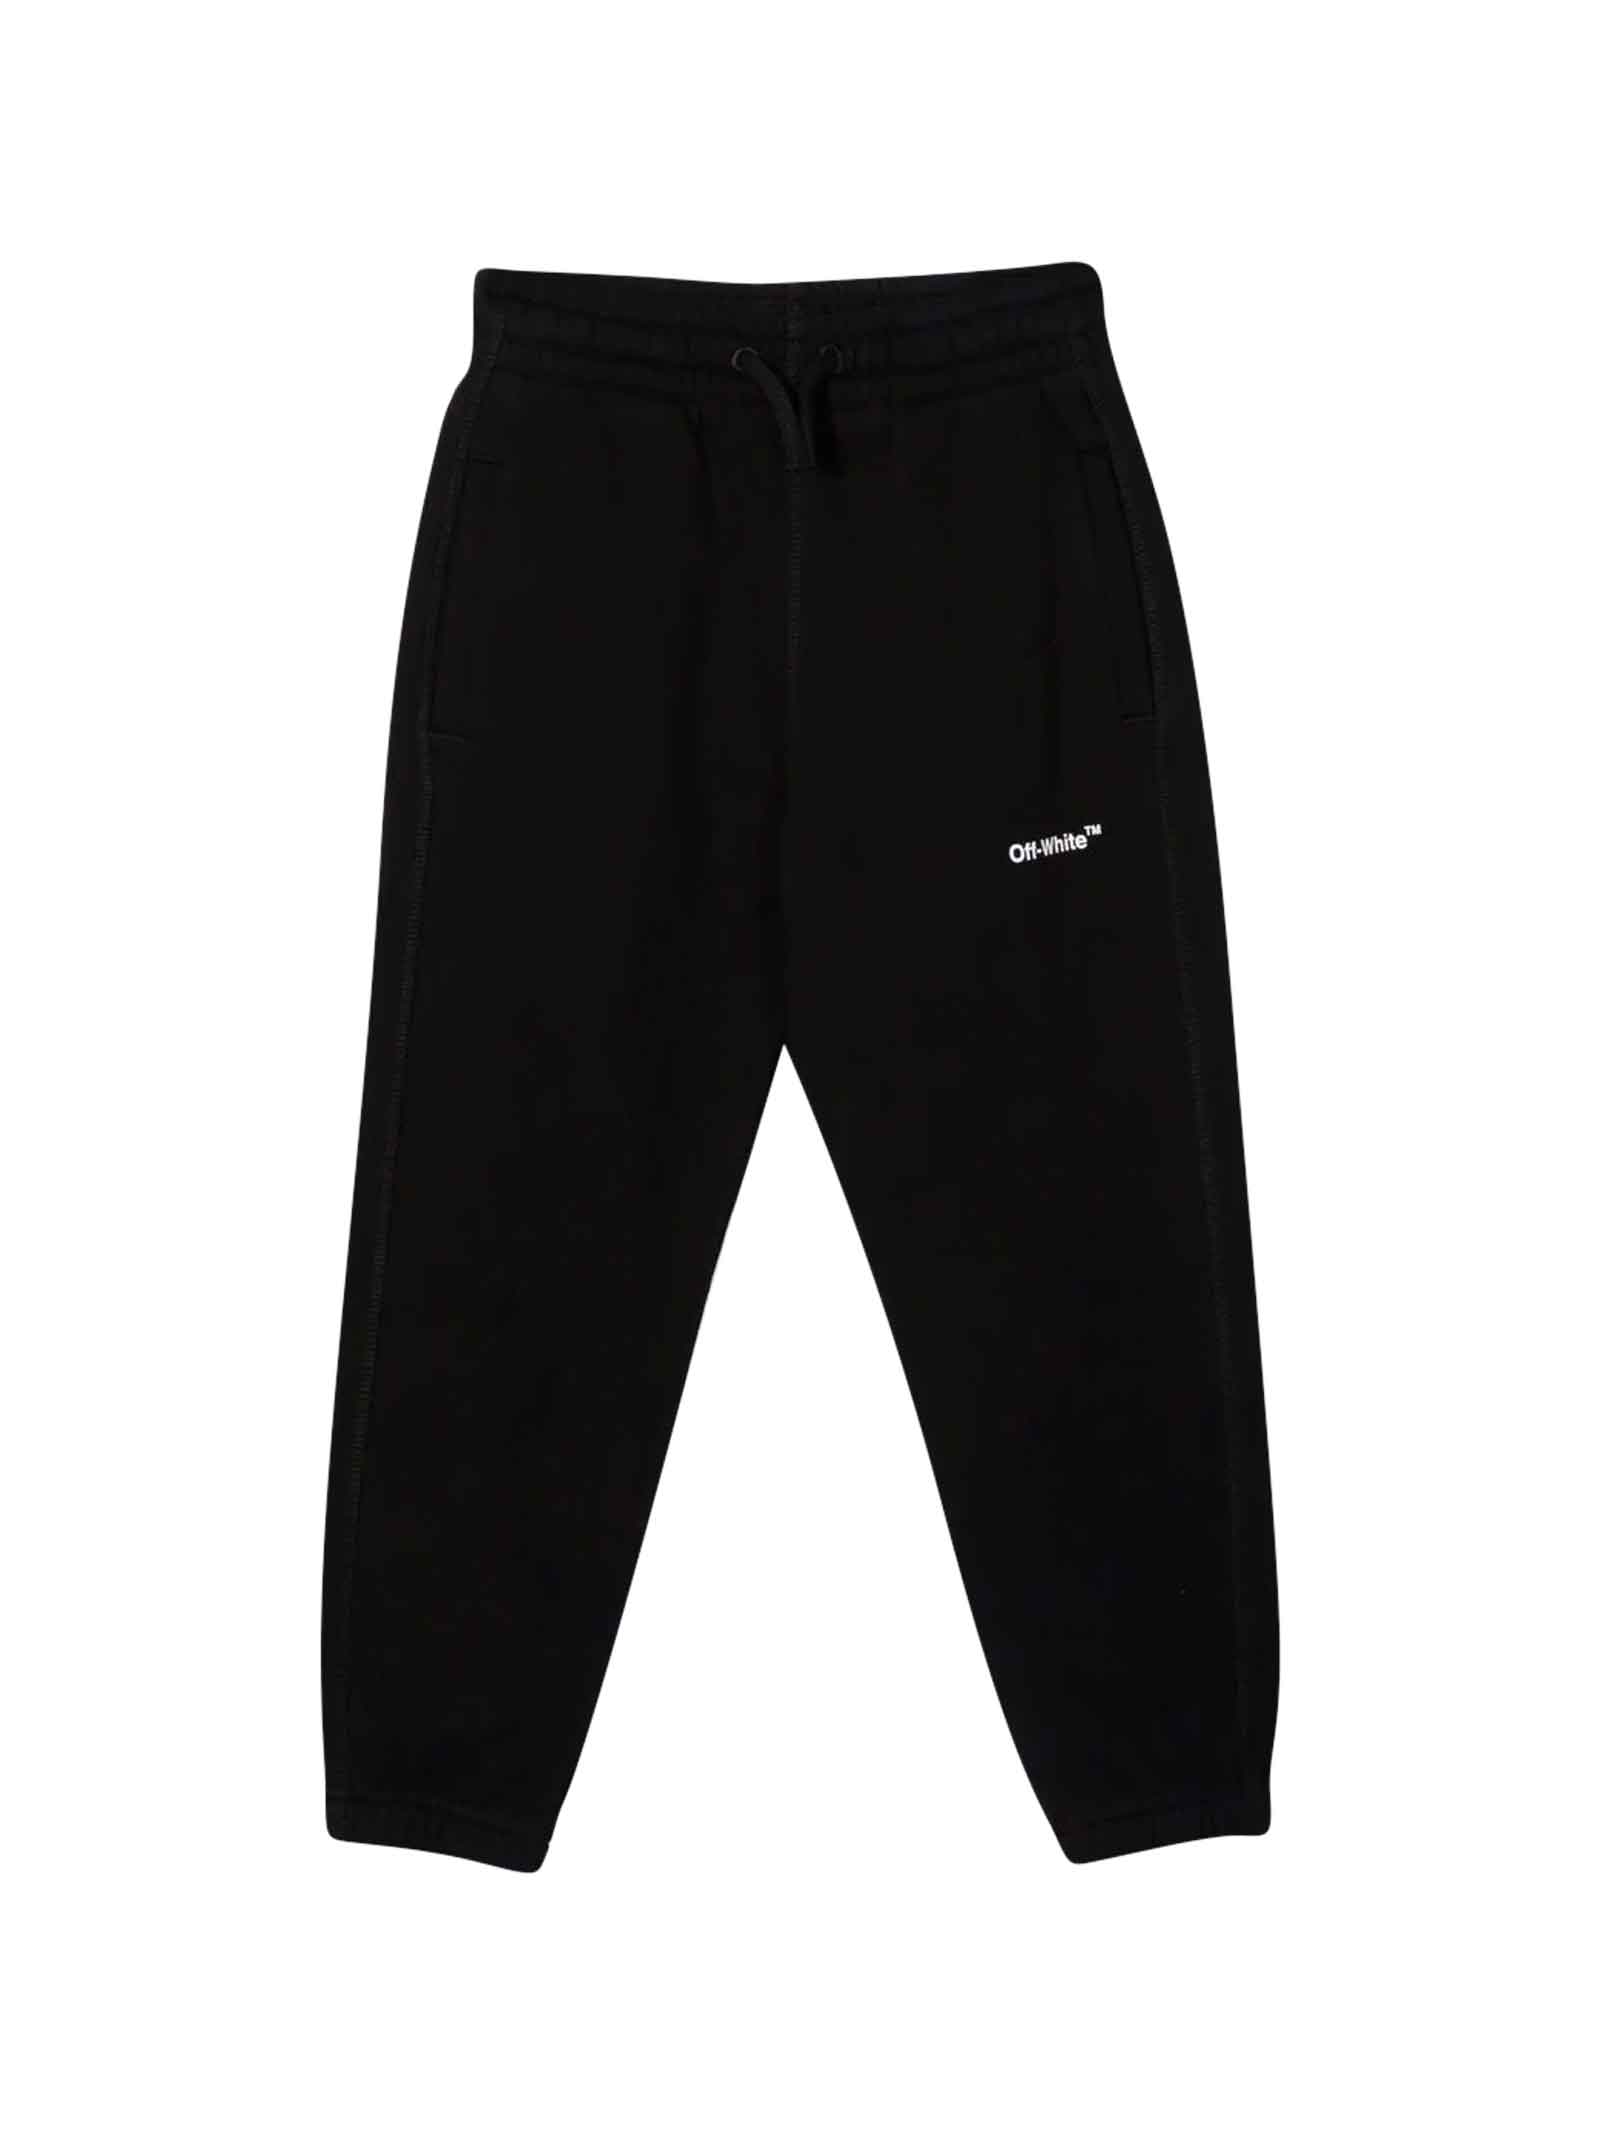 Off-White Black Trousers With White Print